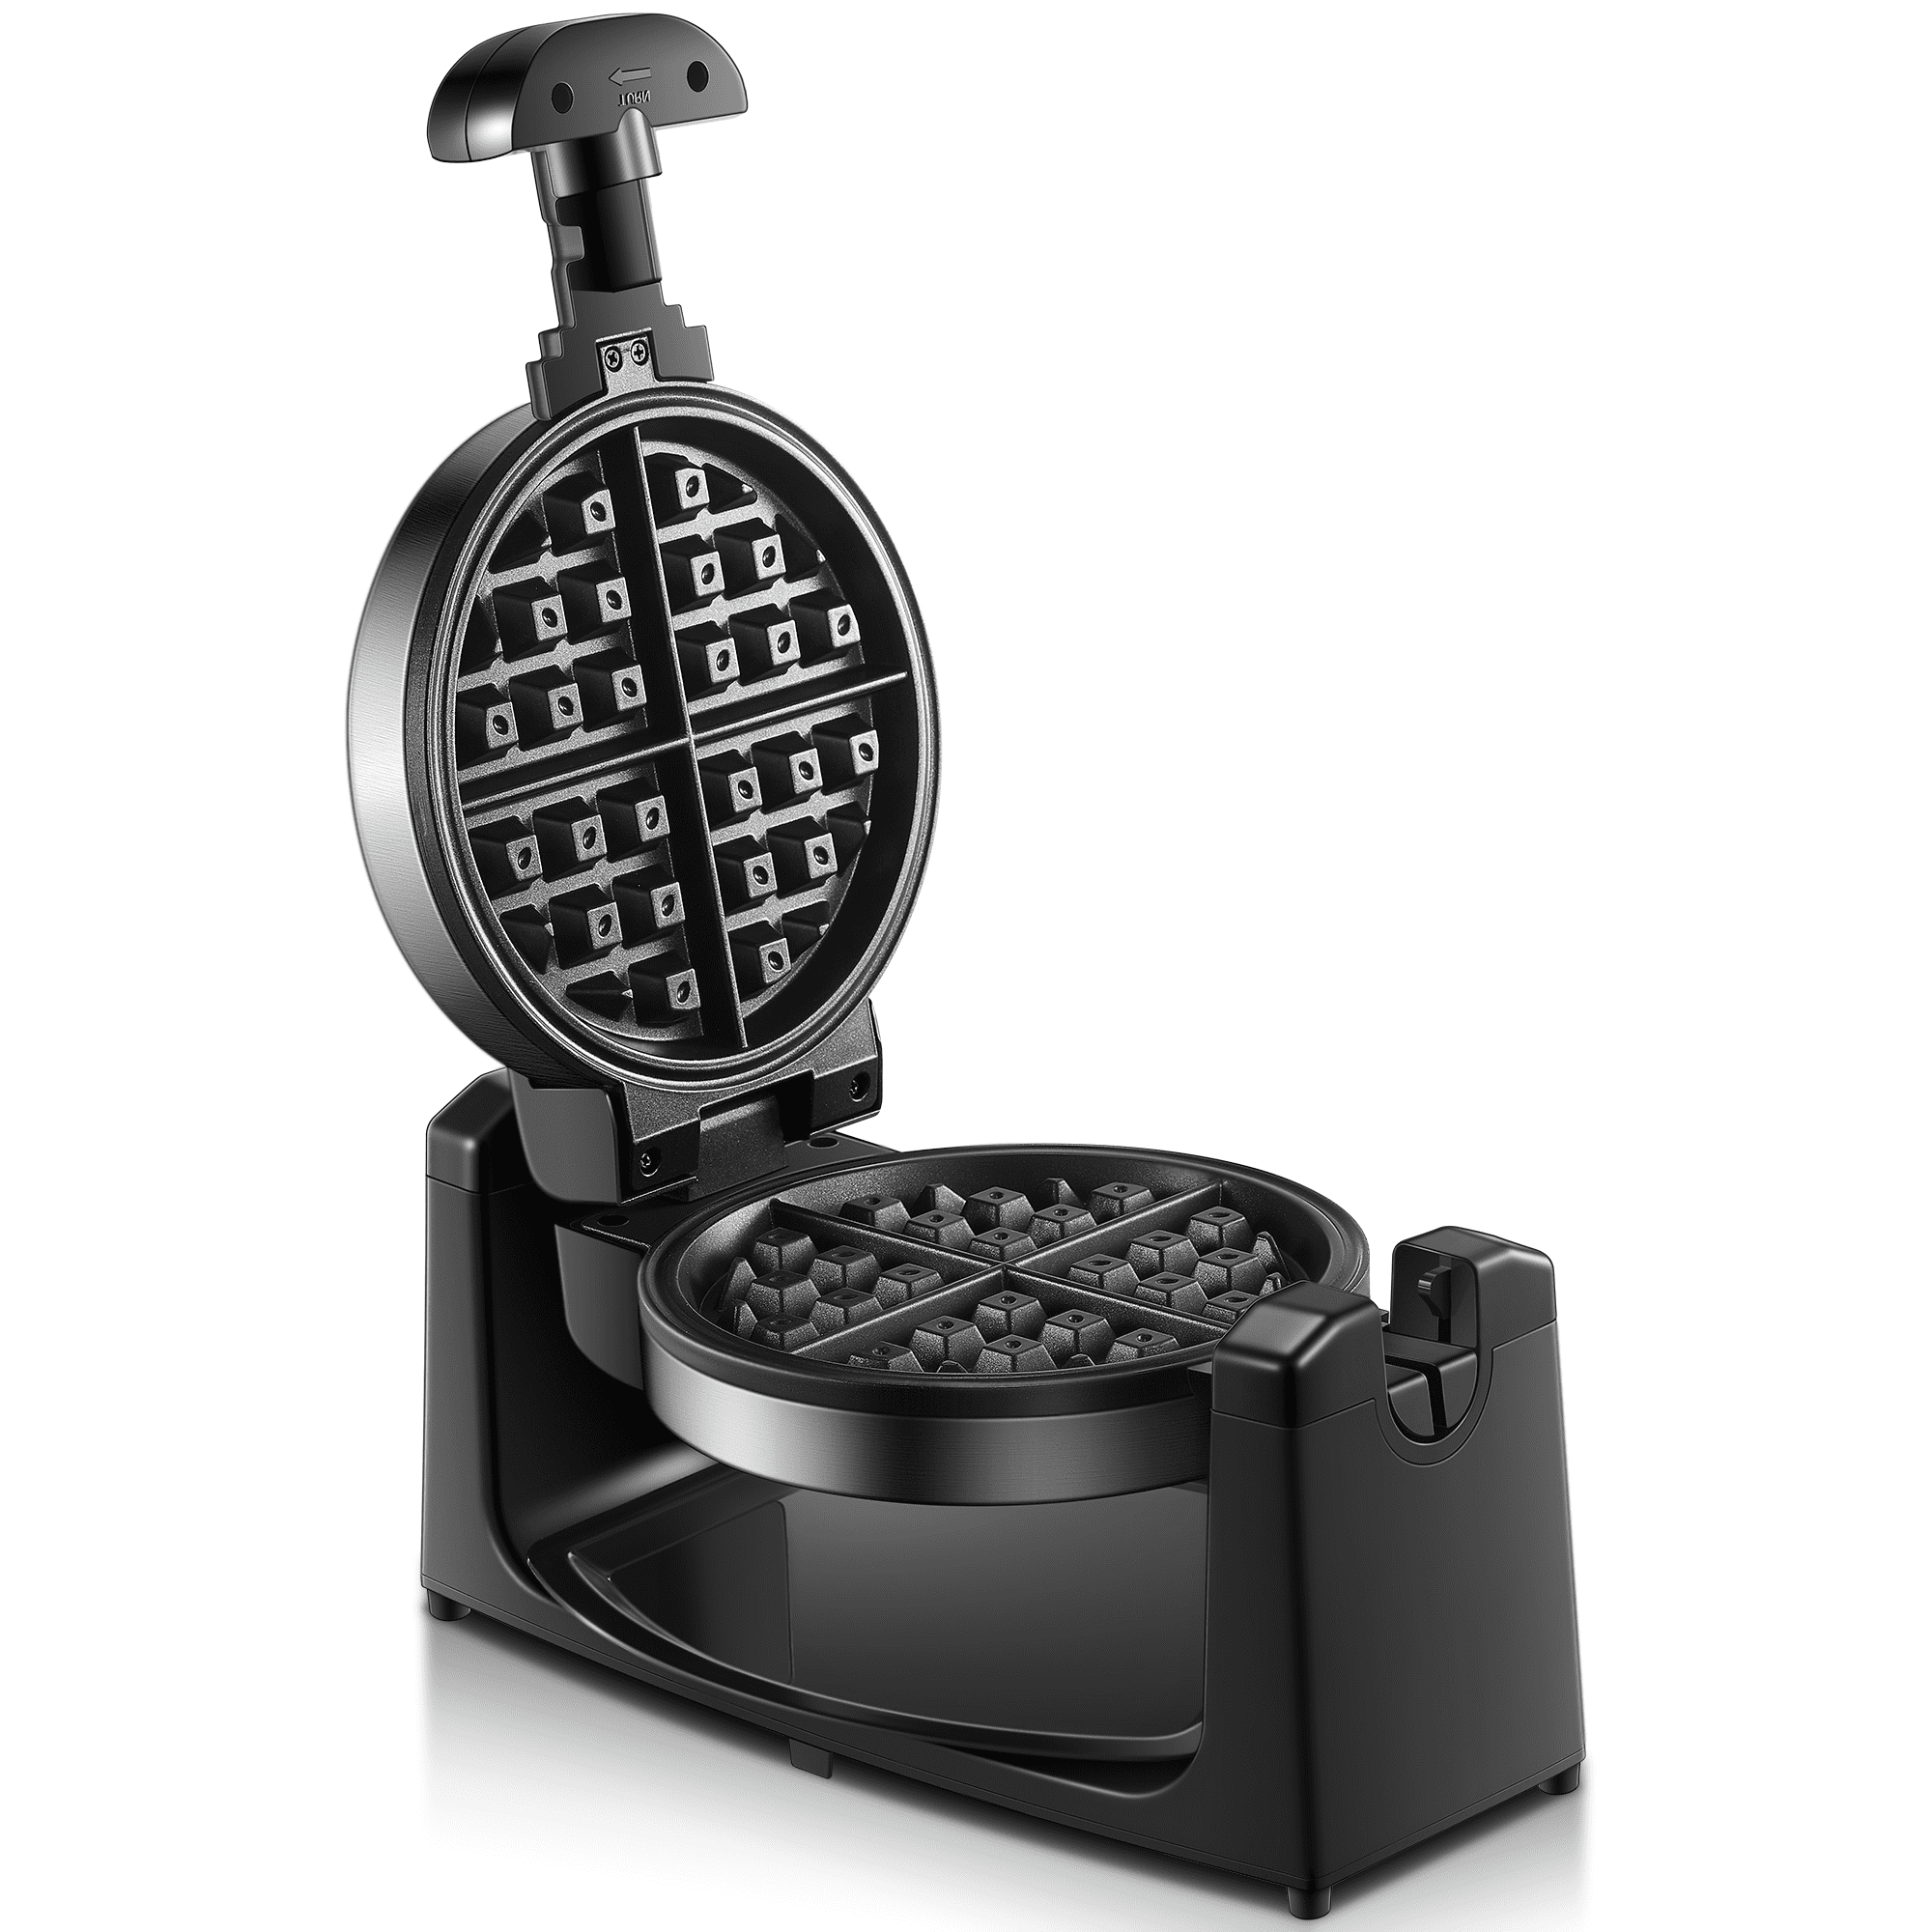 180° Rotating Belgian Waffle Maker, 1100W, Browning Control, Stainless  Steel, New, AICOOK 